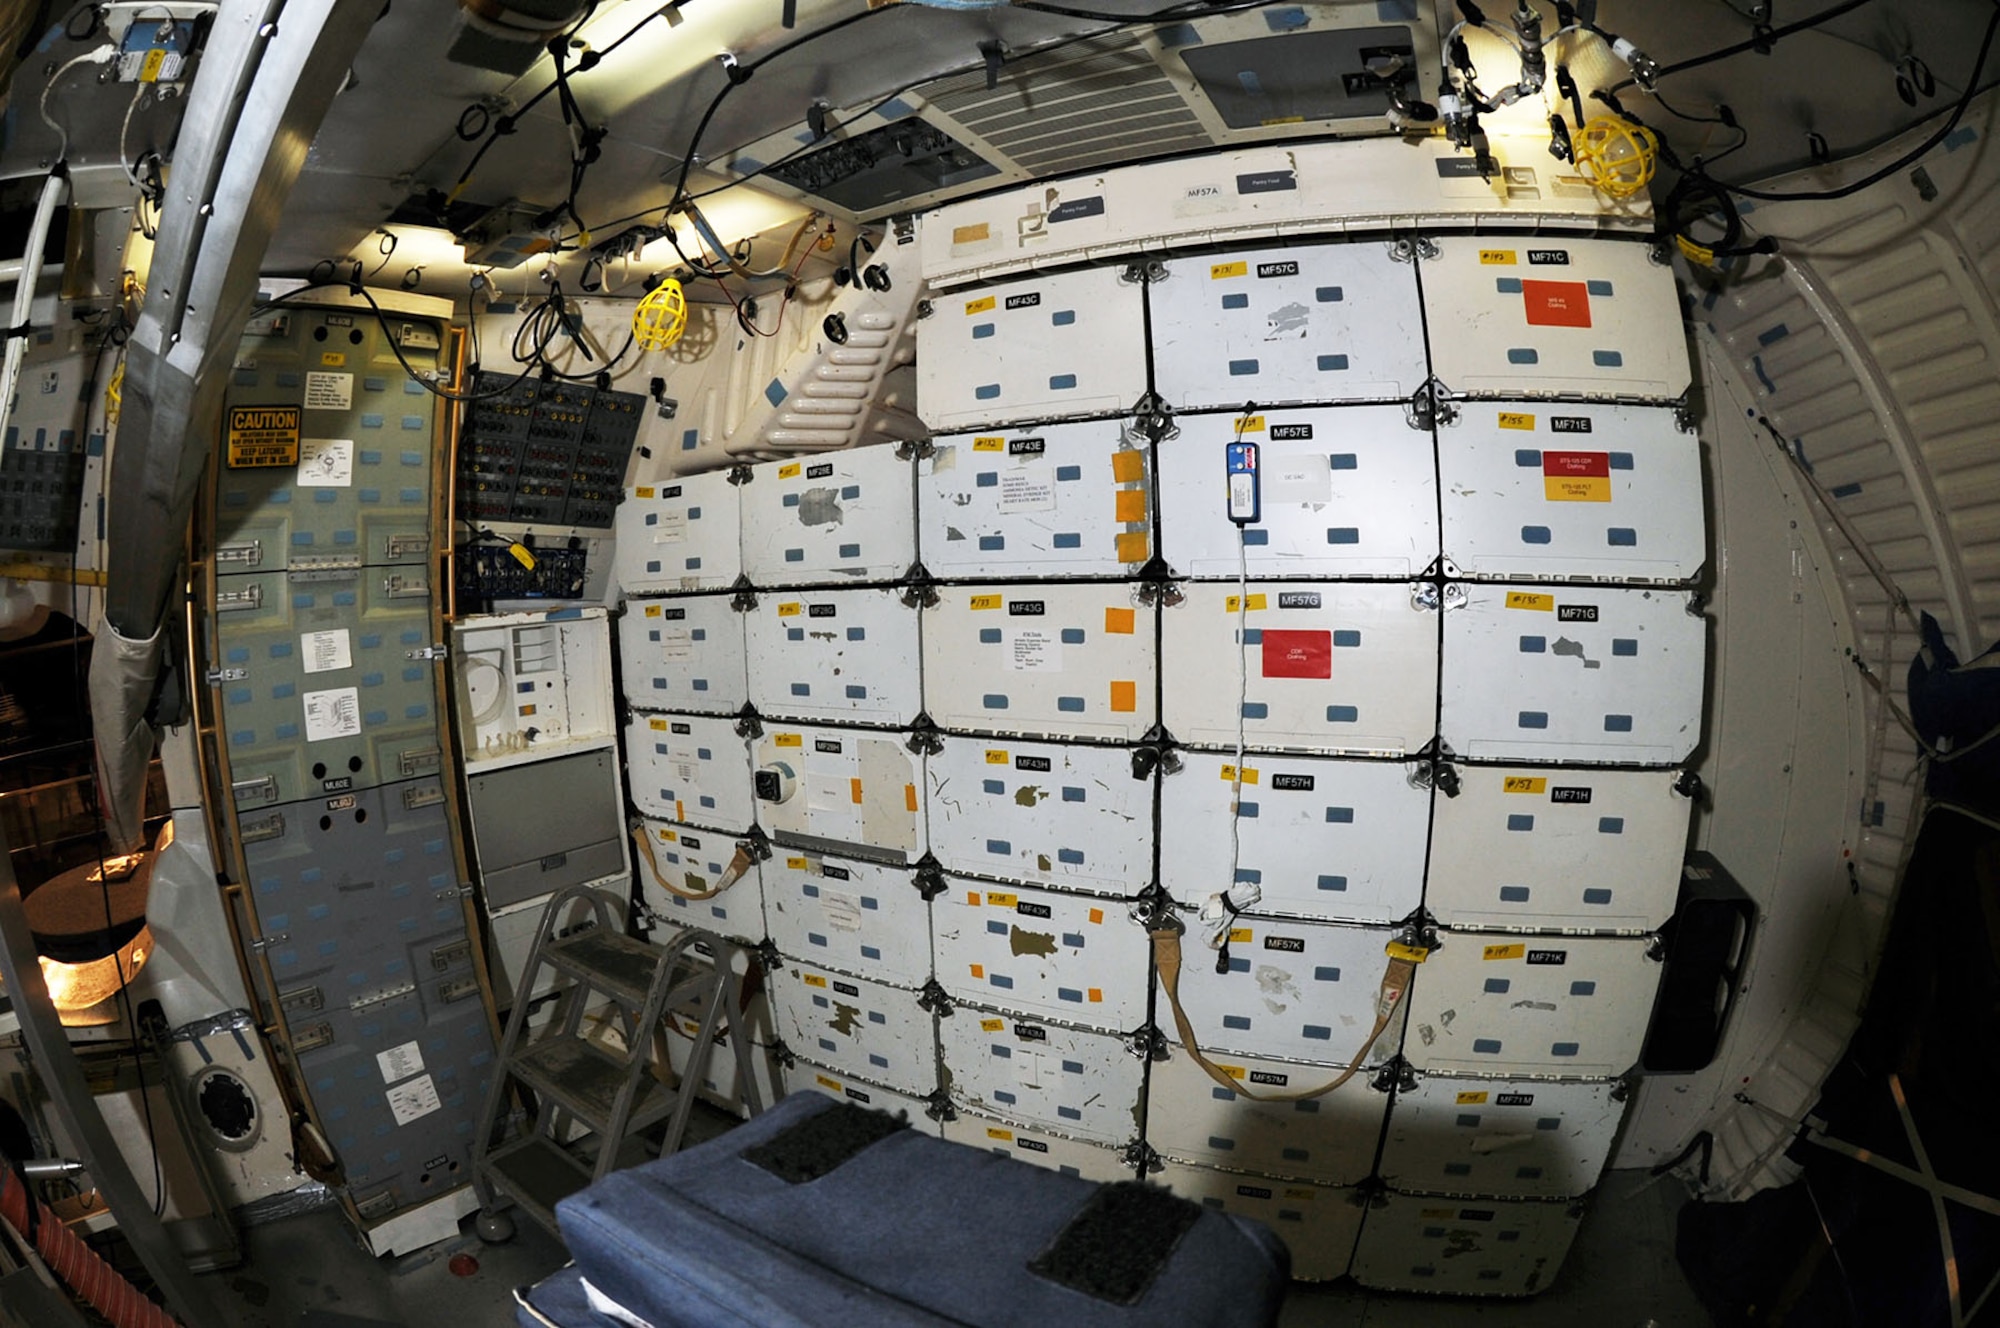 DAYTON, Ohio -- Mid deck of the Crew Compartment Trainer (CCT-1) at the National Museum of the U.S. Air Force. (U.S. Air Force photo by Jeff Fisher)